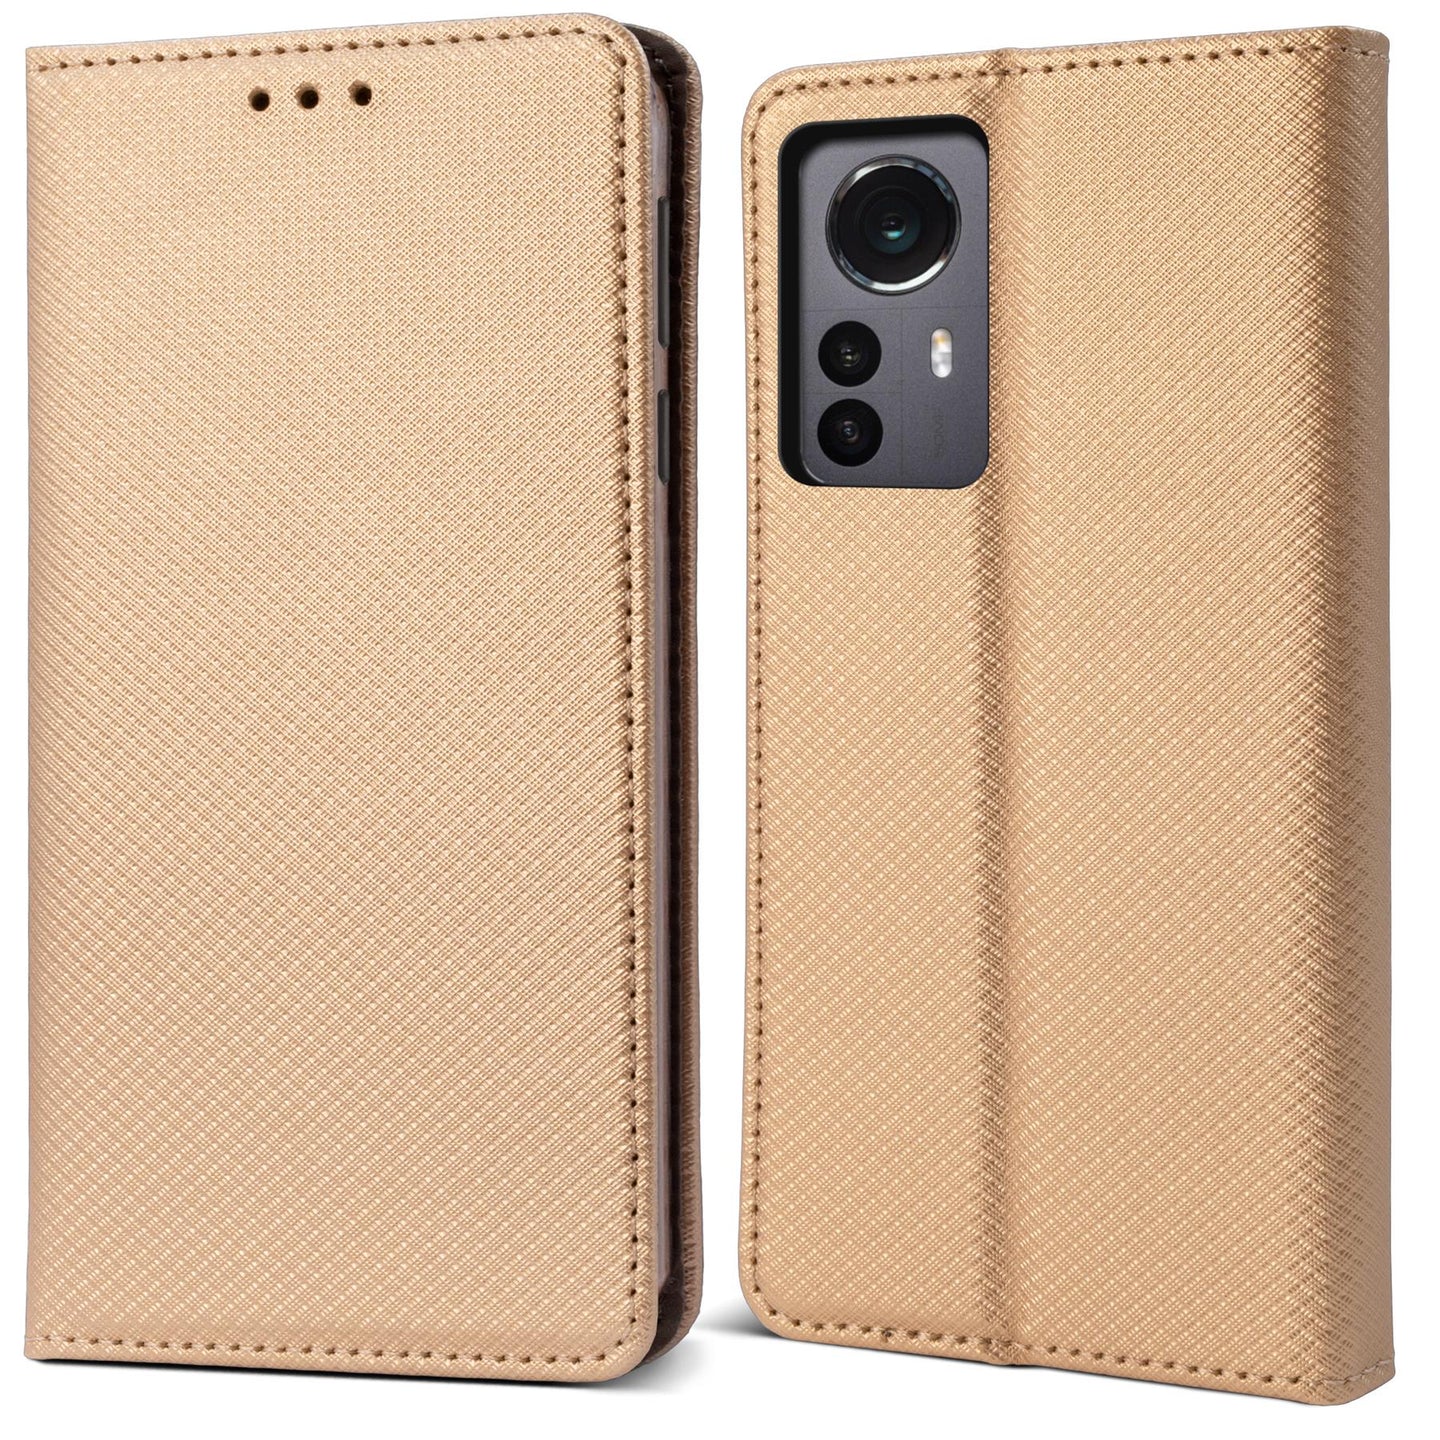 Moozy Case Flip Cover for Xiaomi 12 Pro, Gold - Smart Magnetic Flip Case Flip Folio Wallet Case with Card Holder and Stand, Credit Card Slots, Kickstand Function